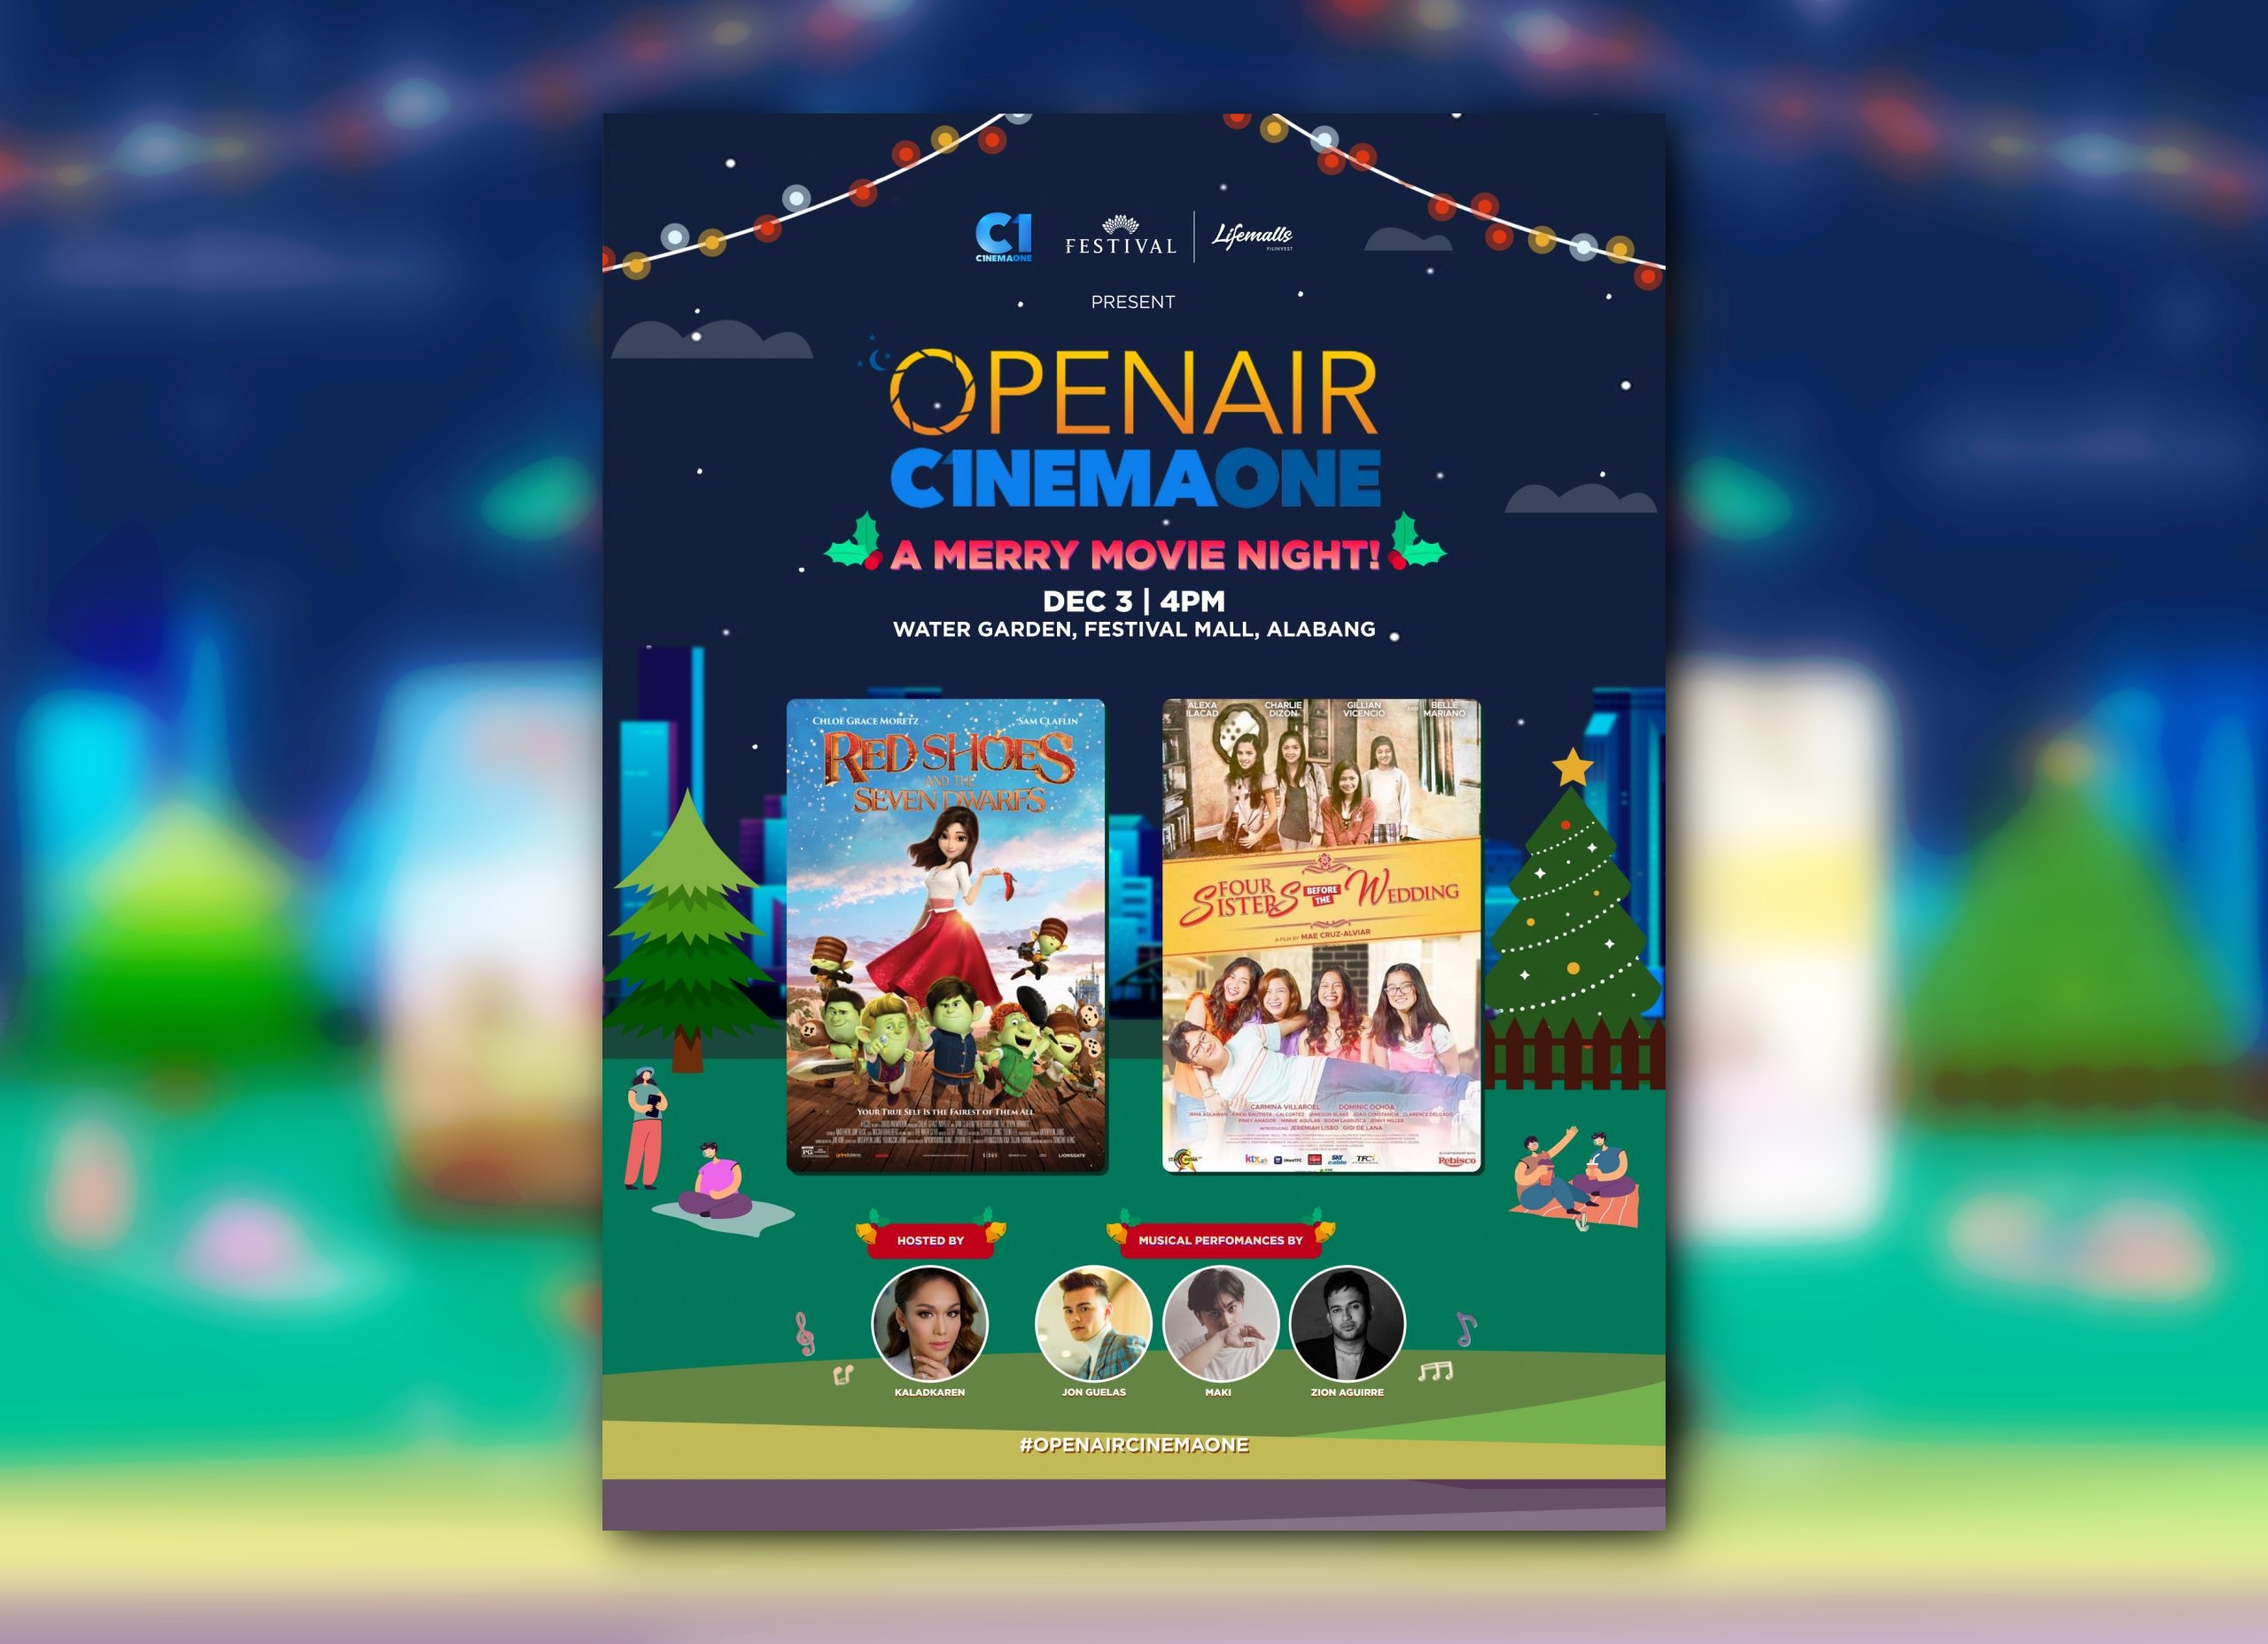 OpenAir Cinema One brings "Four Sisters Before the Wedding," "Red Shoes and the Seven Dwarfs" this Christmas season